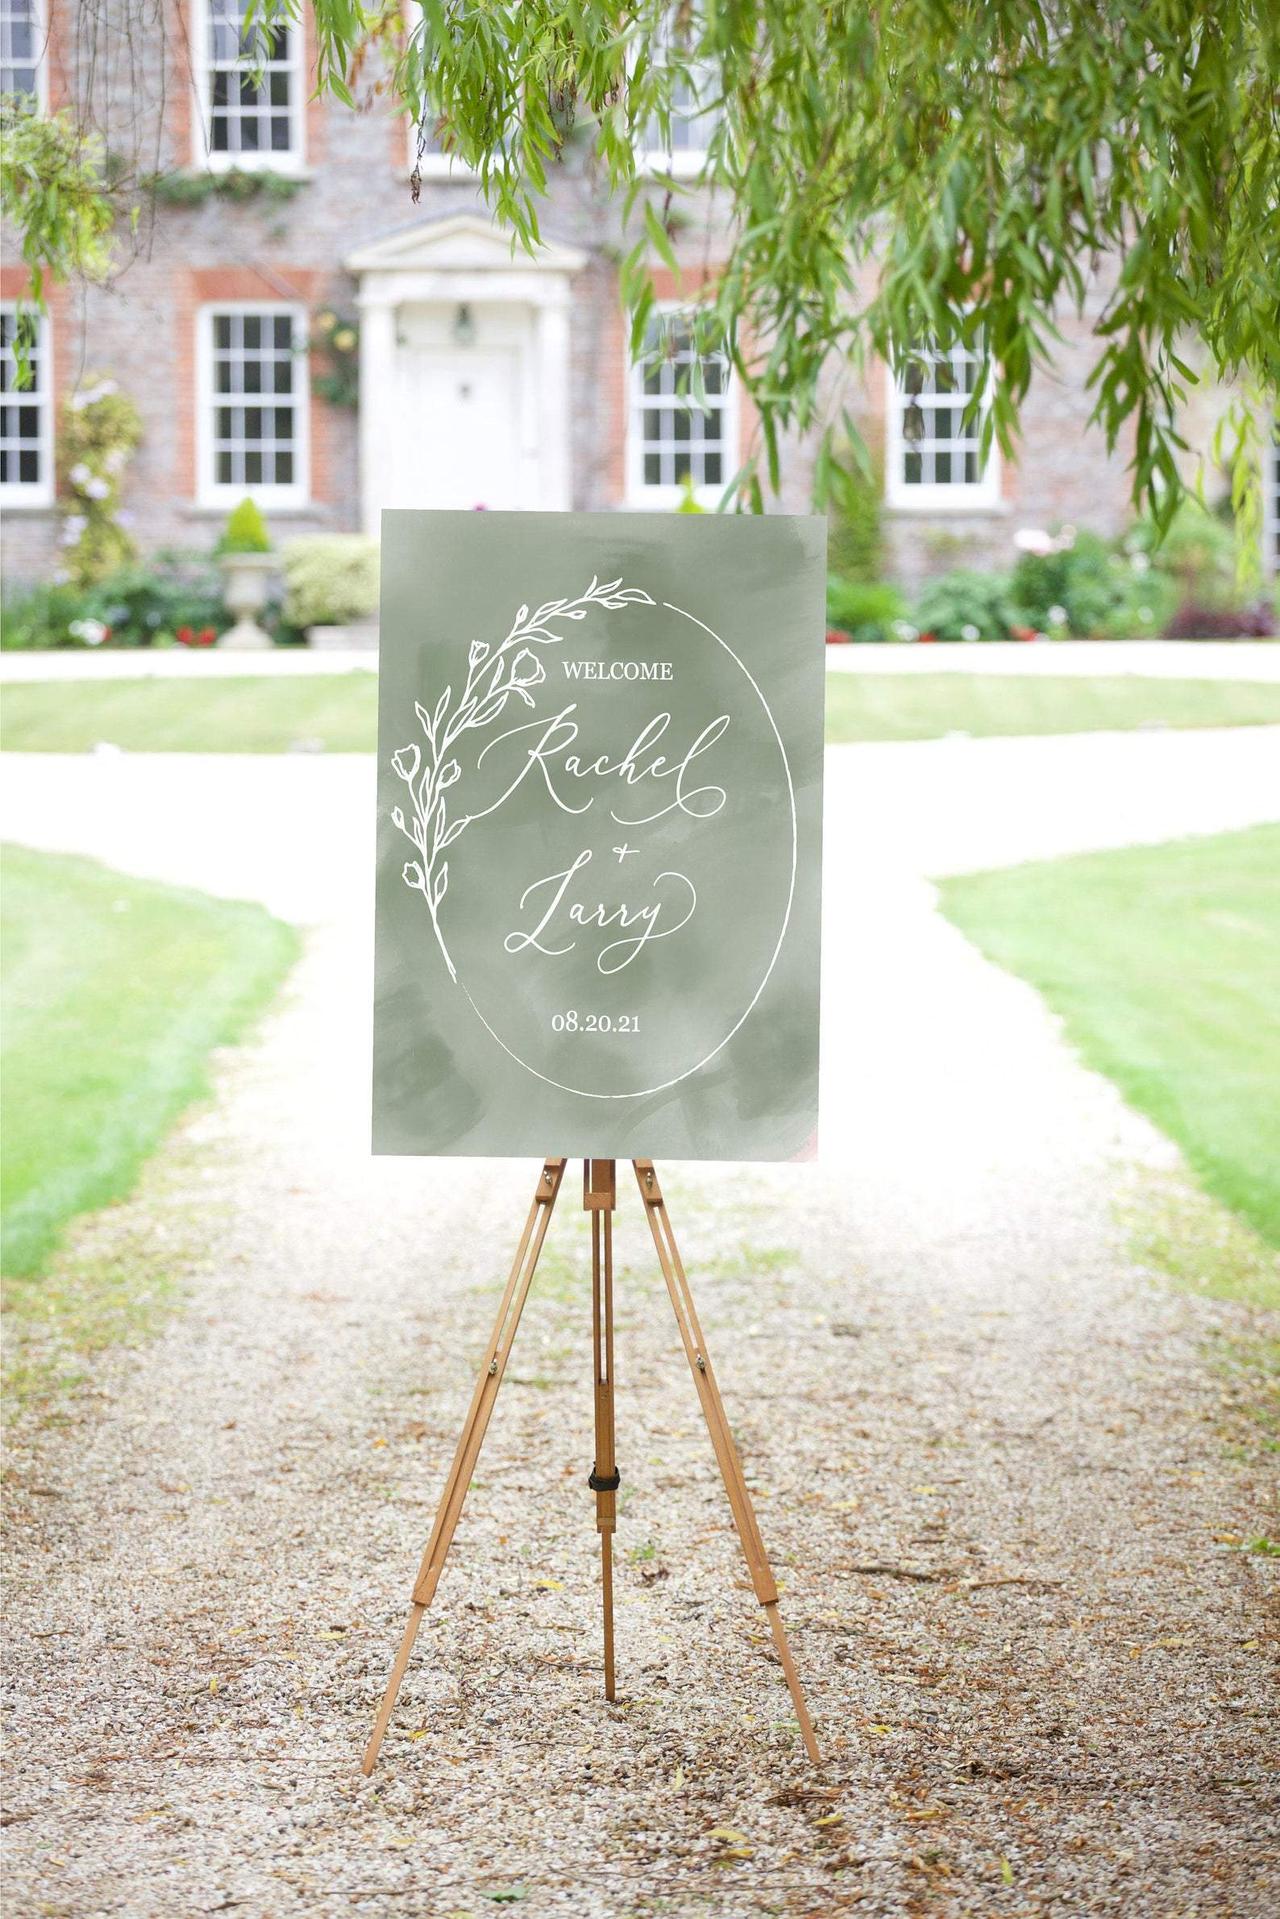 Easel stand for signs? What did you use?, Weddings, Do It Yourself, Wedding Forums